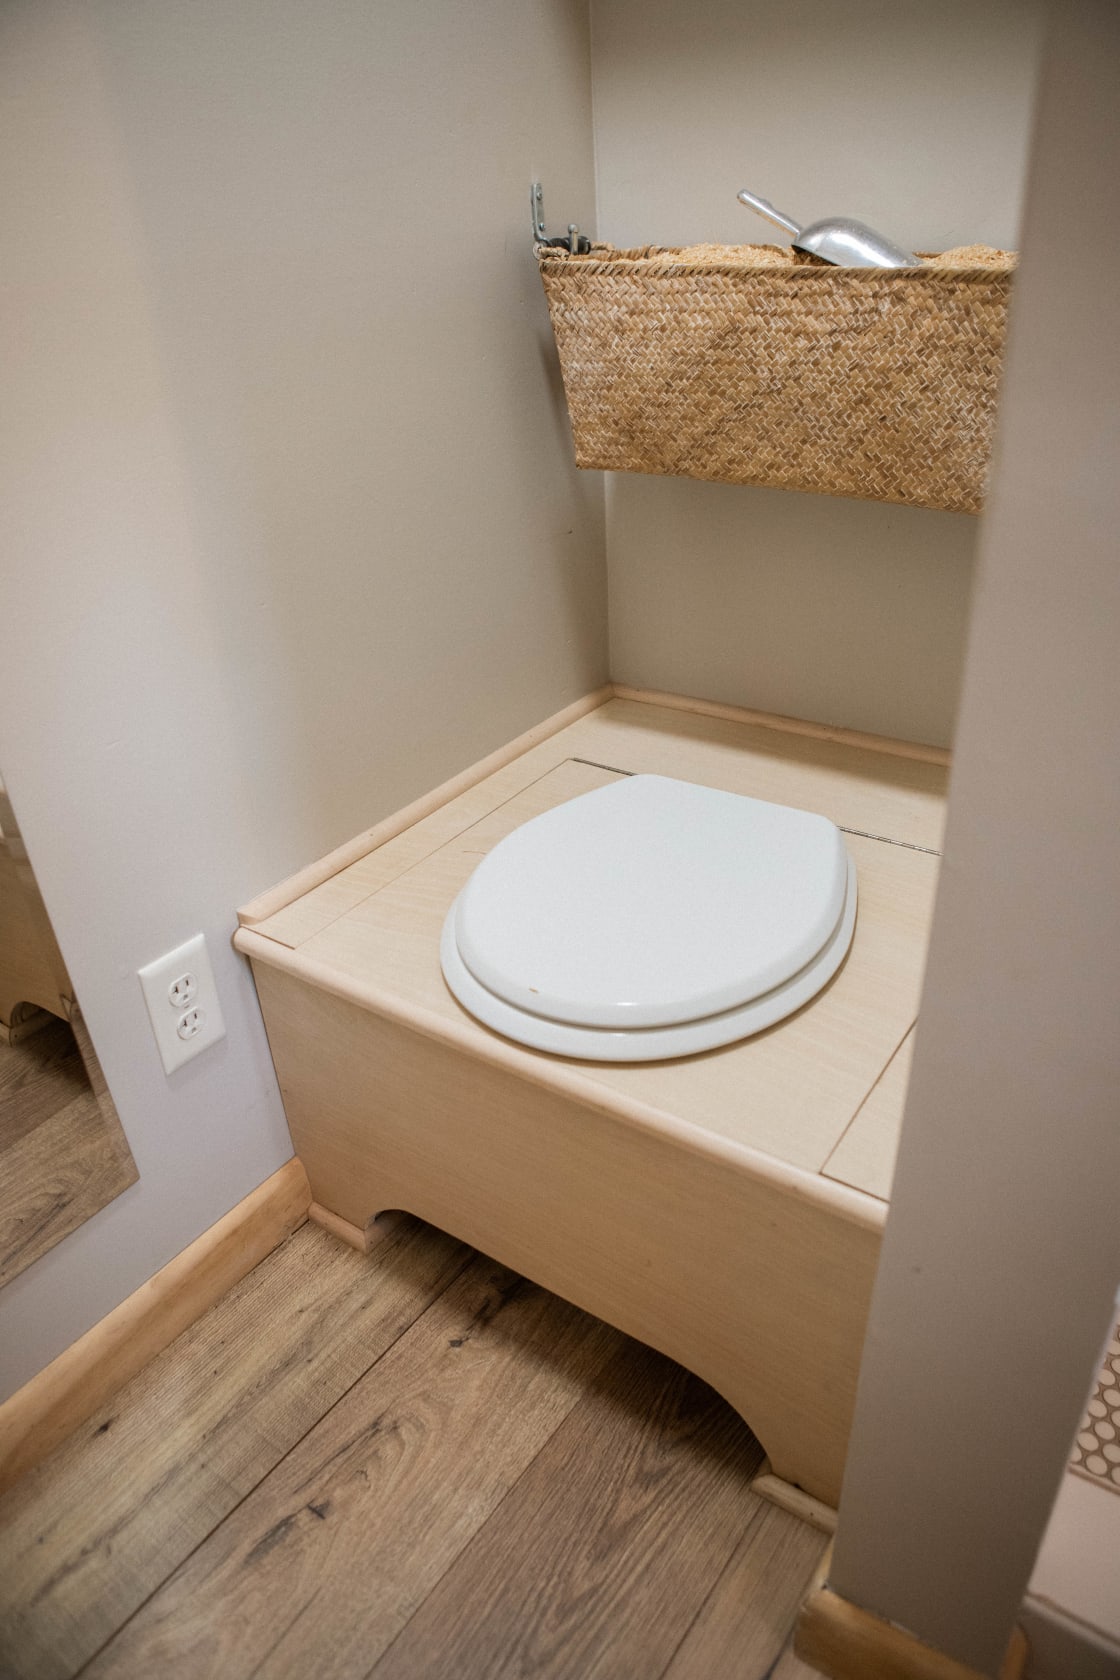 They also have a composting toilet!